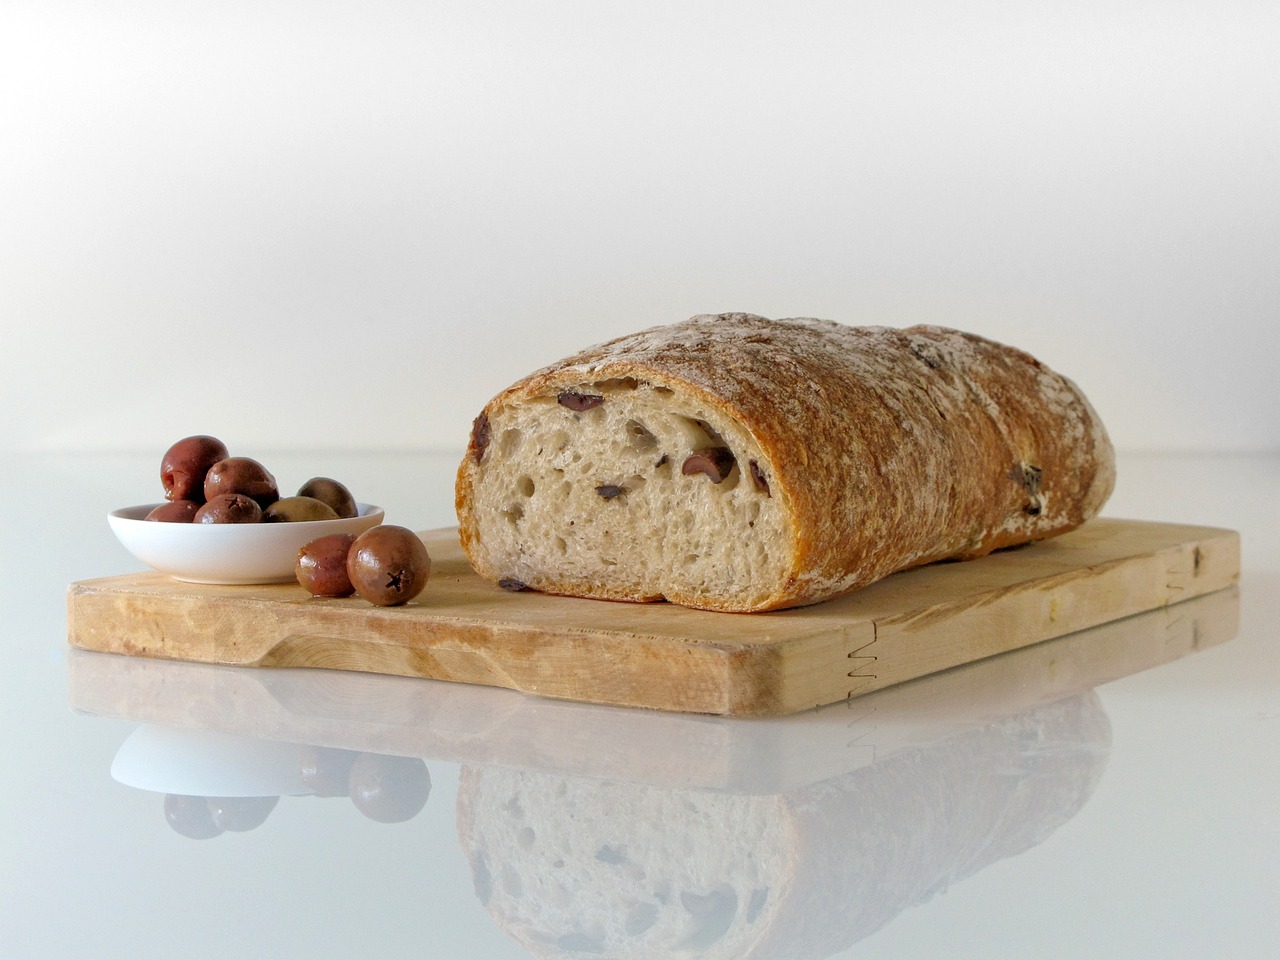 Bread loaf with olives